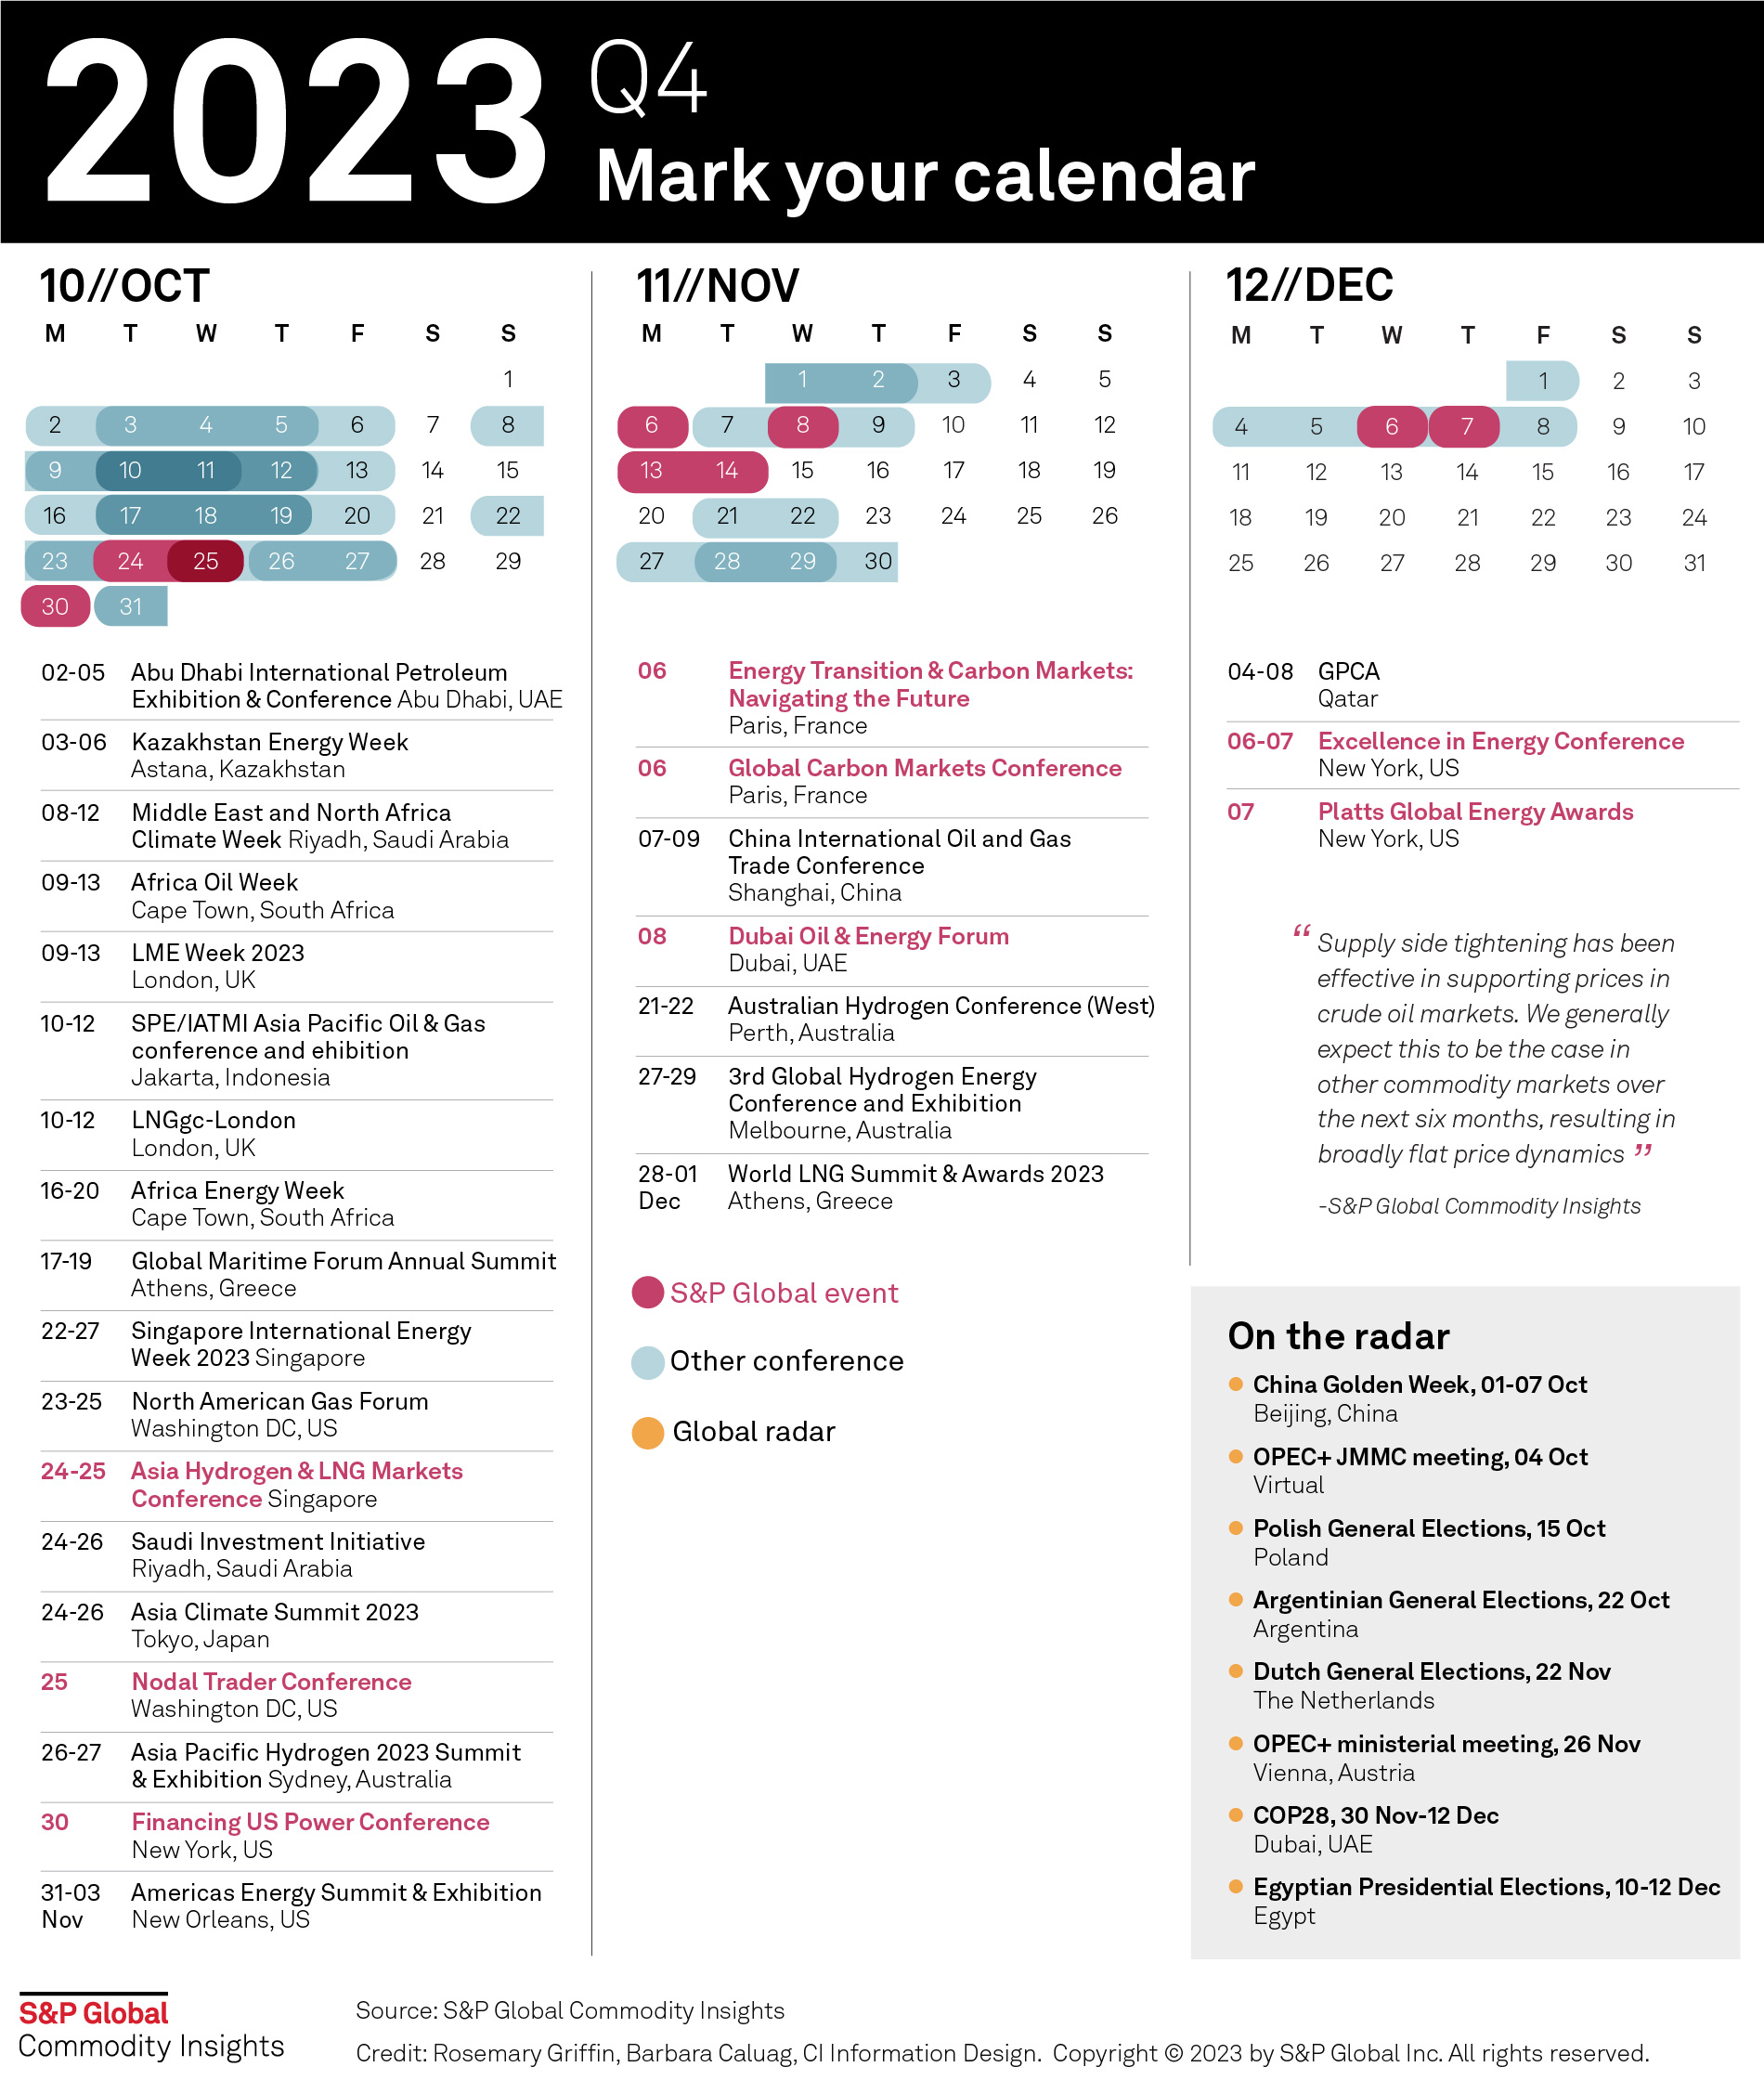 Calendar of commodity market events Q4 2023 | Commodities Calendar | Oil & Gas, LNG, Climate, Hydrogen, Energy Transition, COP28, LME Week, Metals